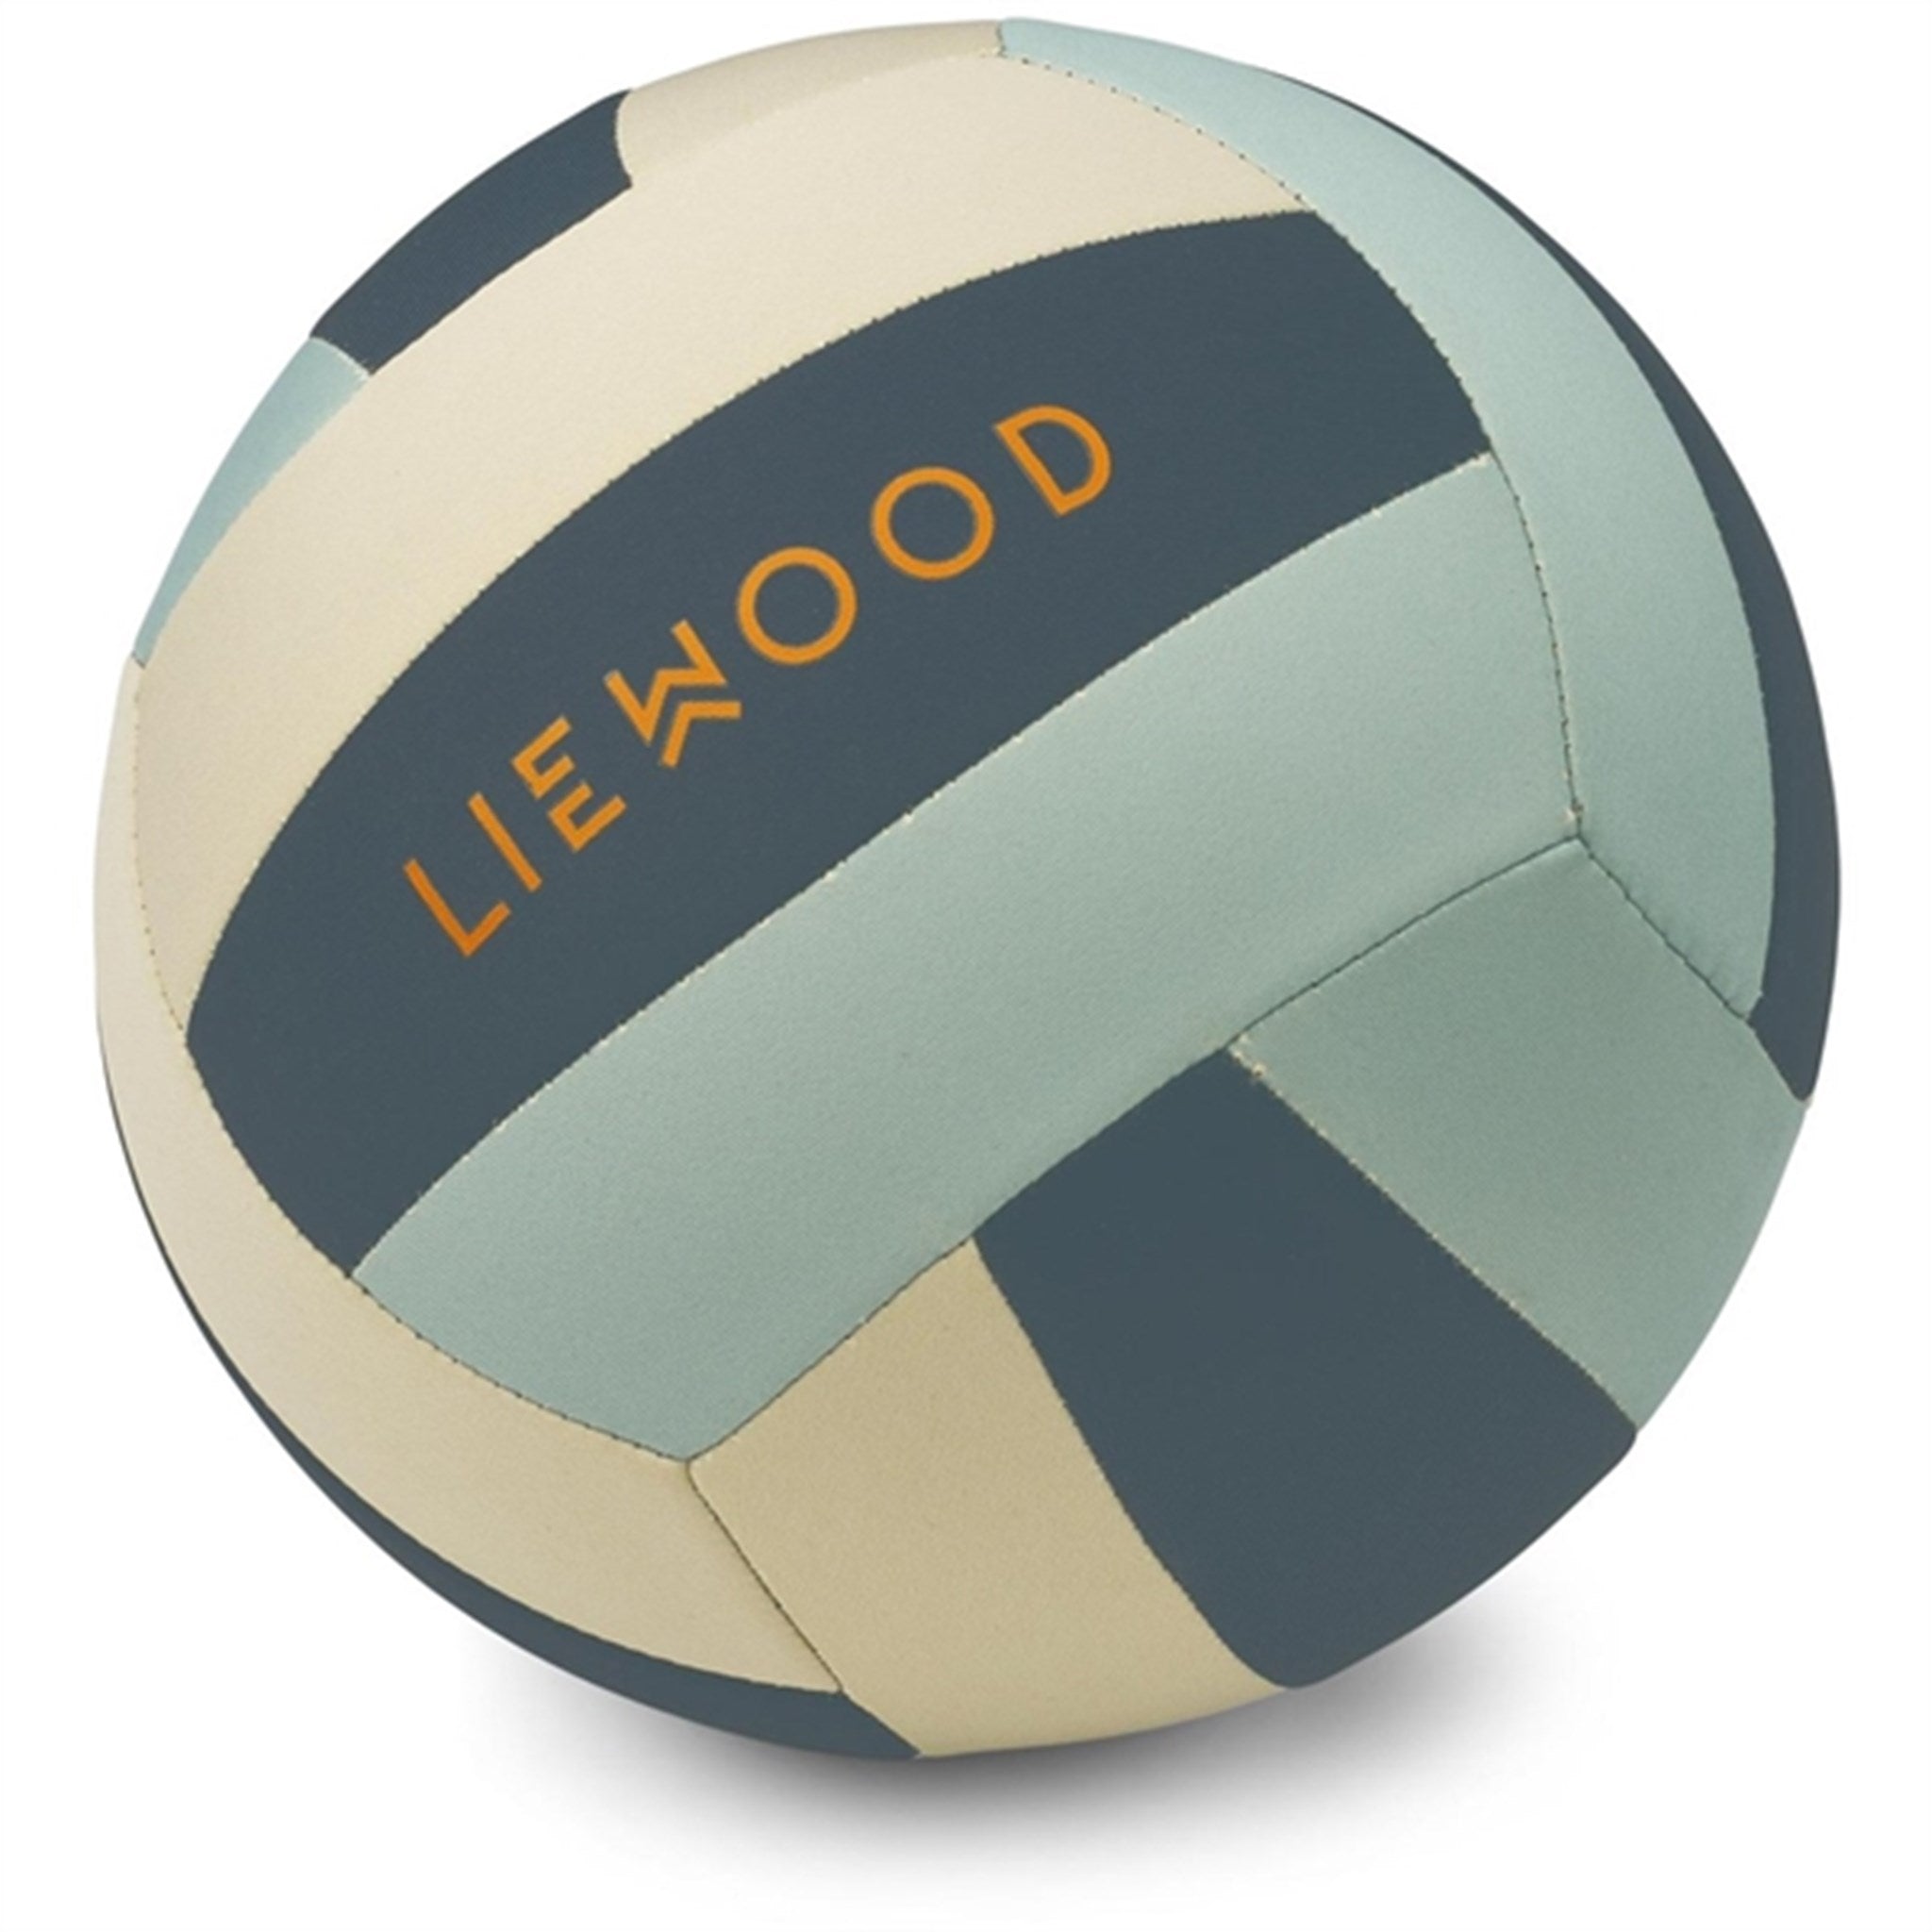 Liewood Villa Volley Ball Whale Blue Multi Mix